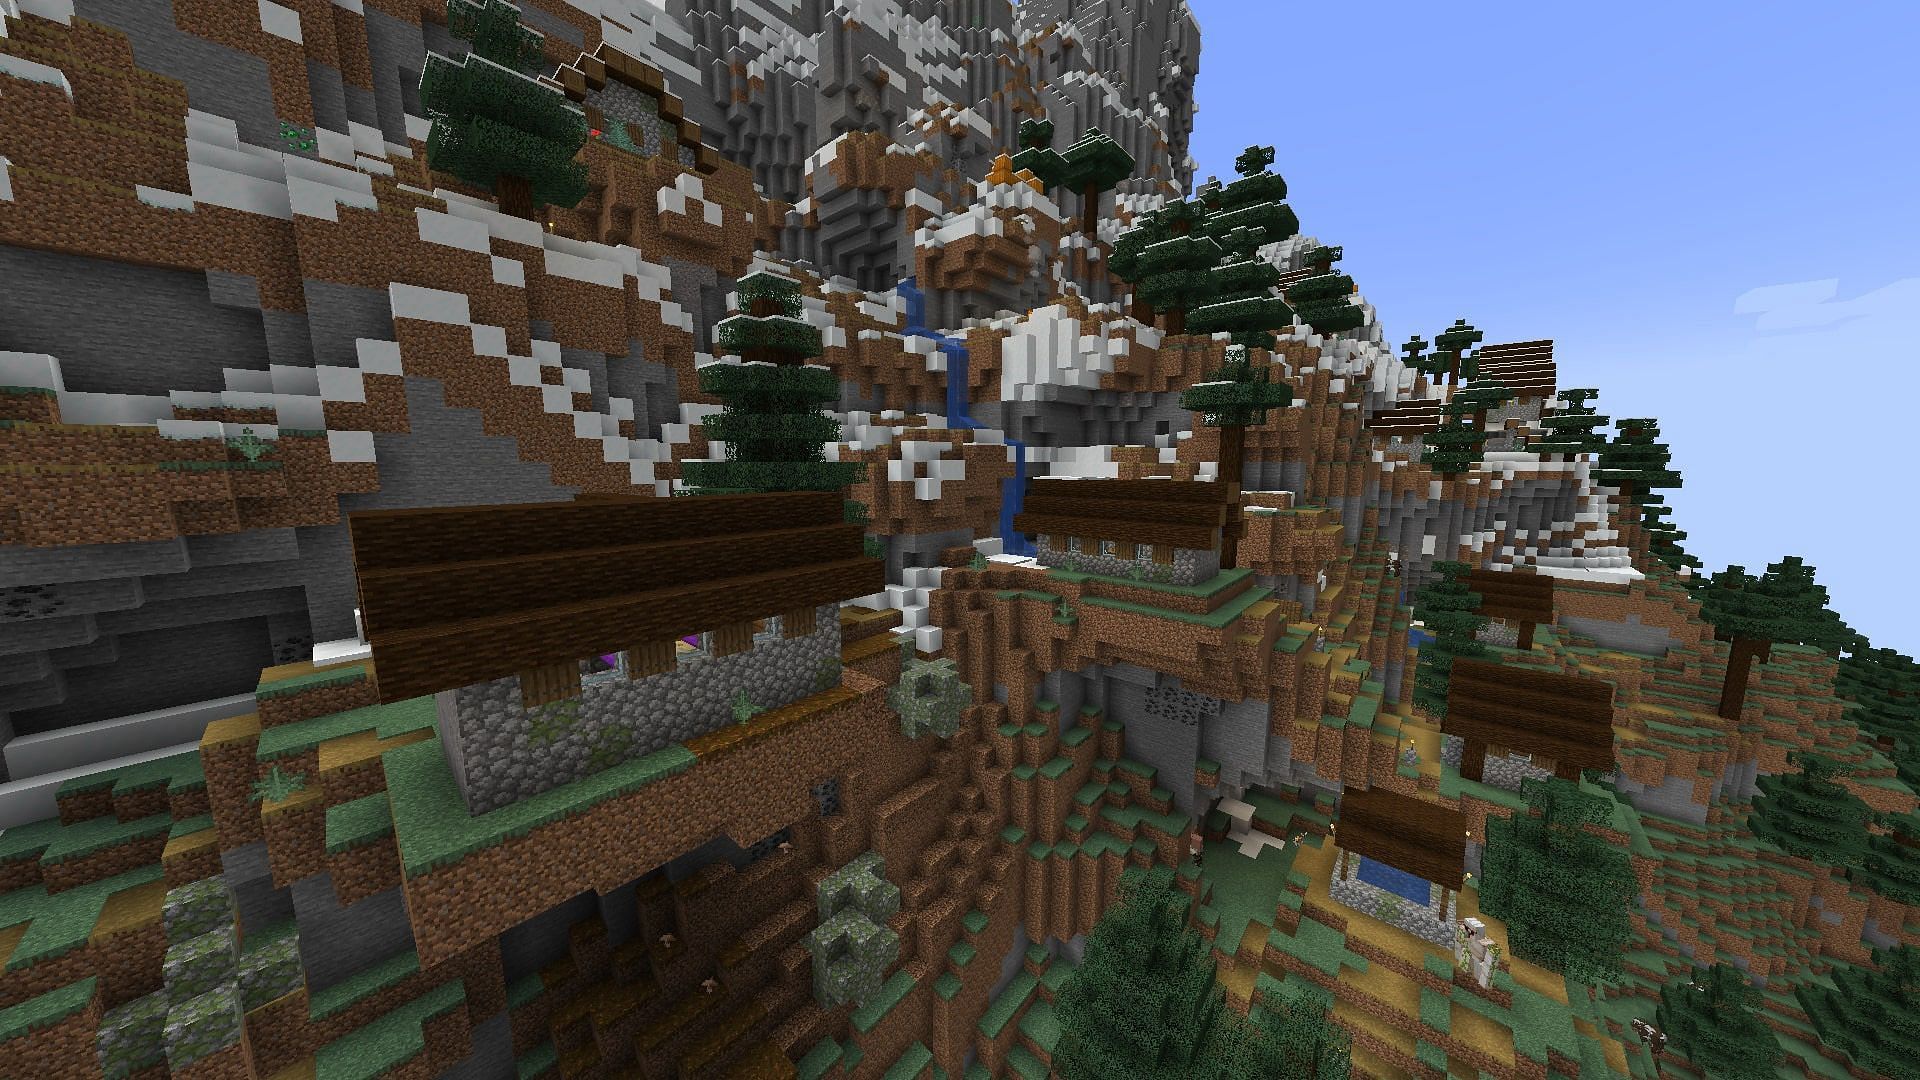 Taiga village spawning on the foothills of a humongous mountain (Image via Minecraft)